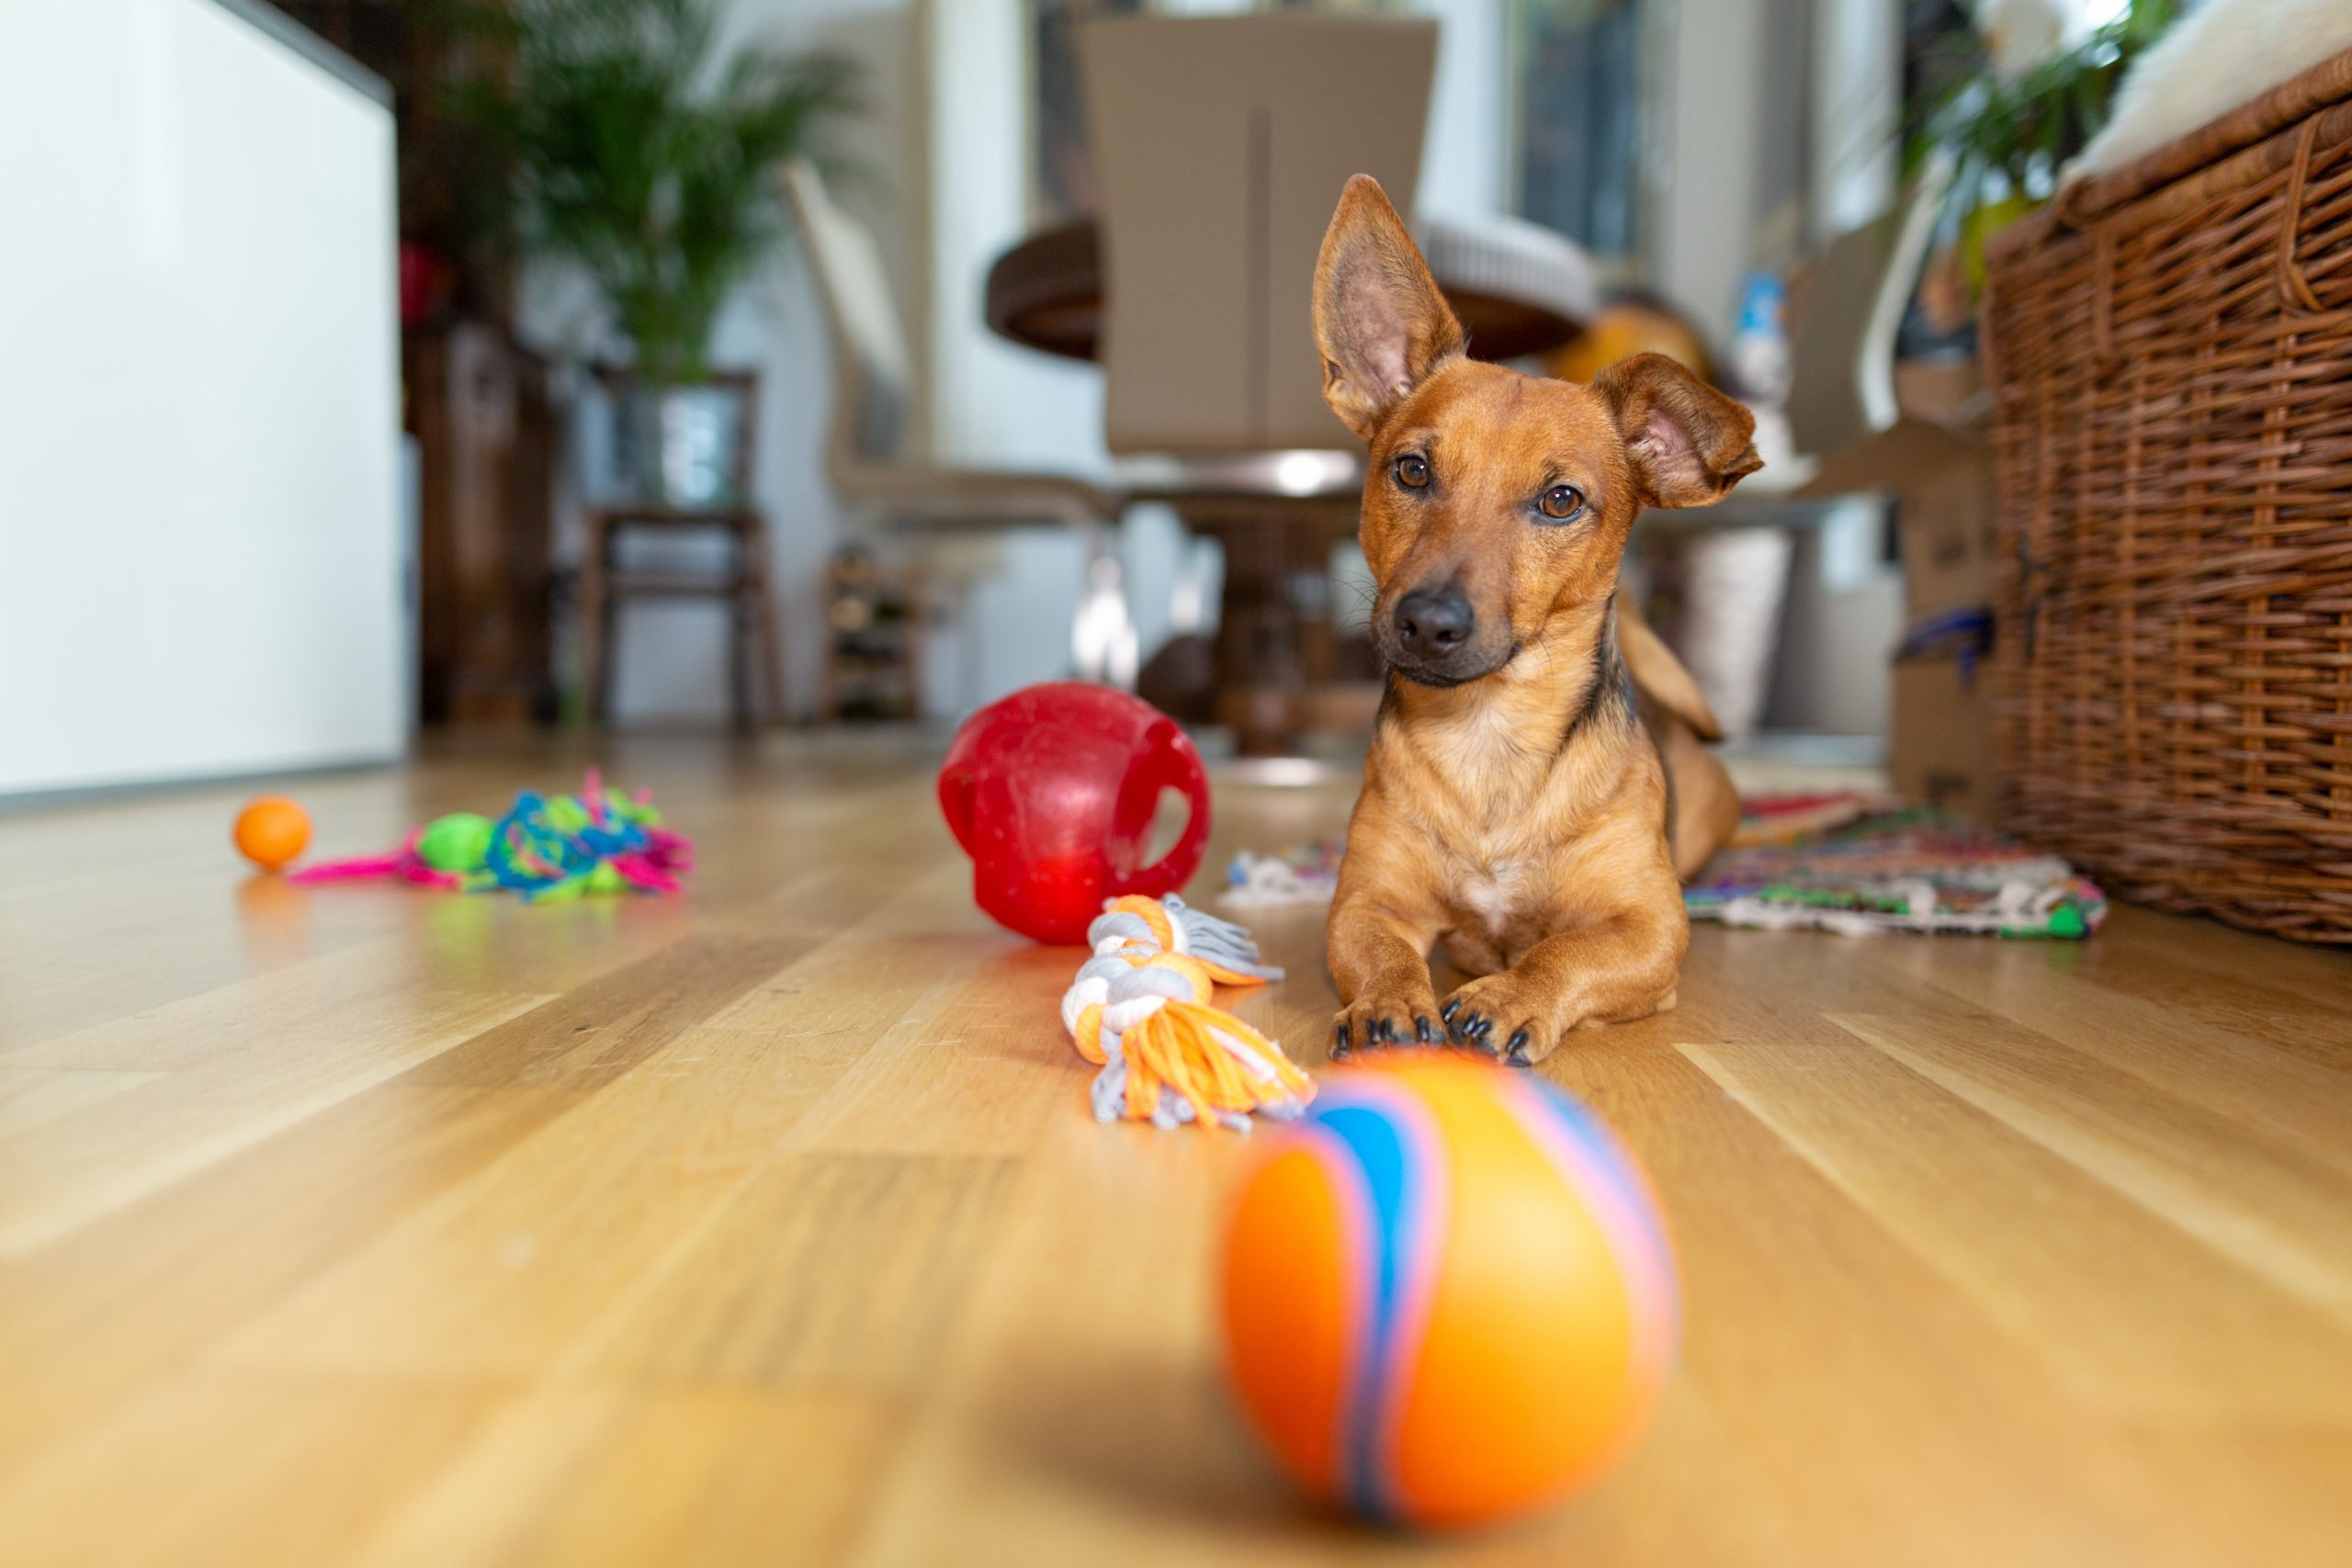 https://www.rd.com/wp-content/uploads/2019/10/dog-with-toys-scaled.jpg